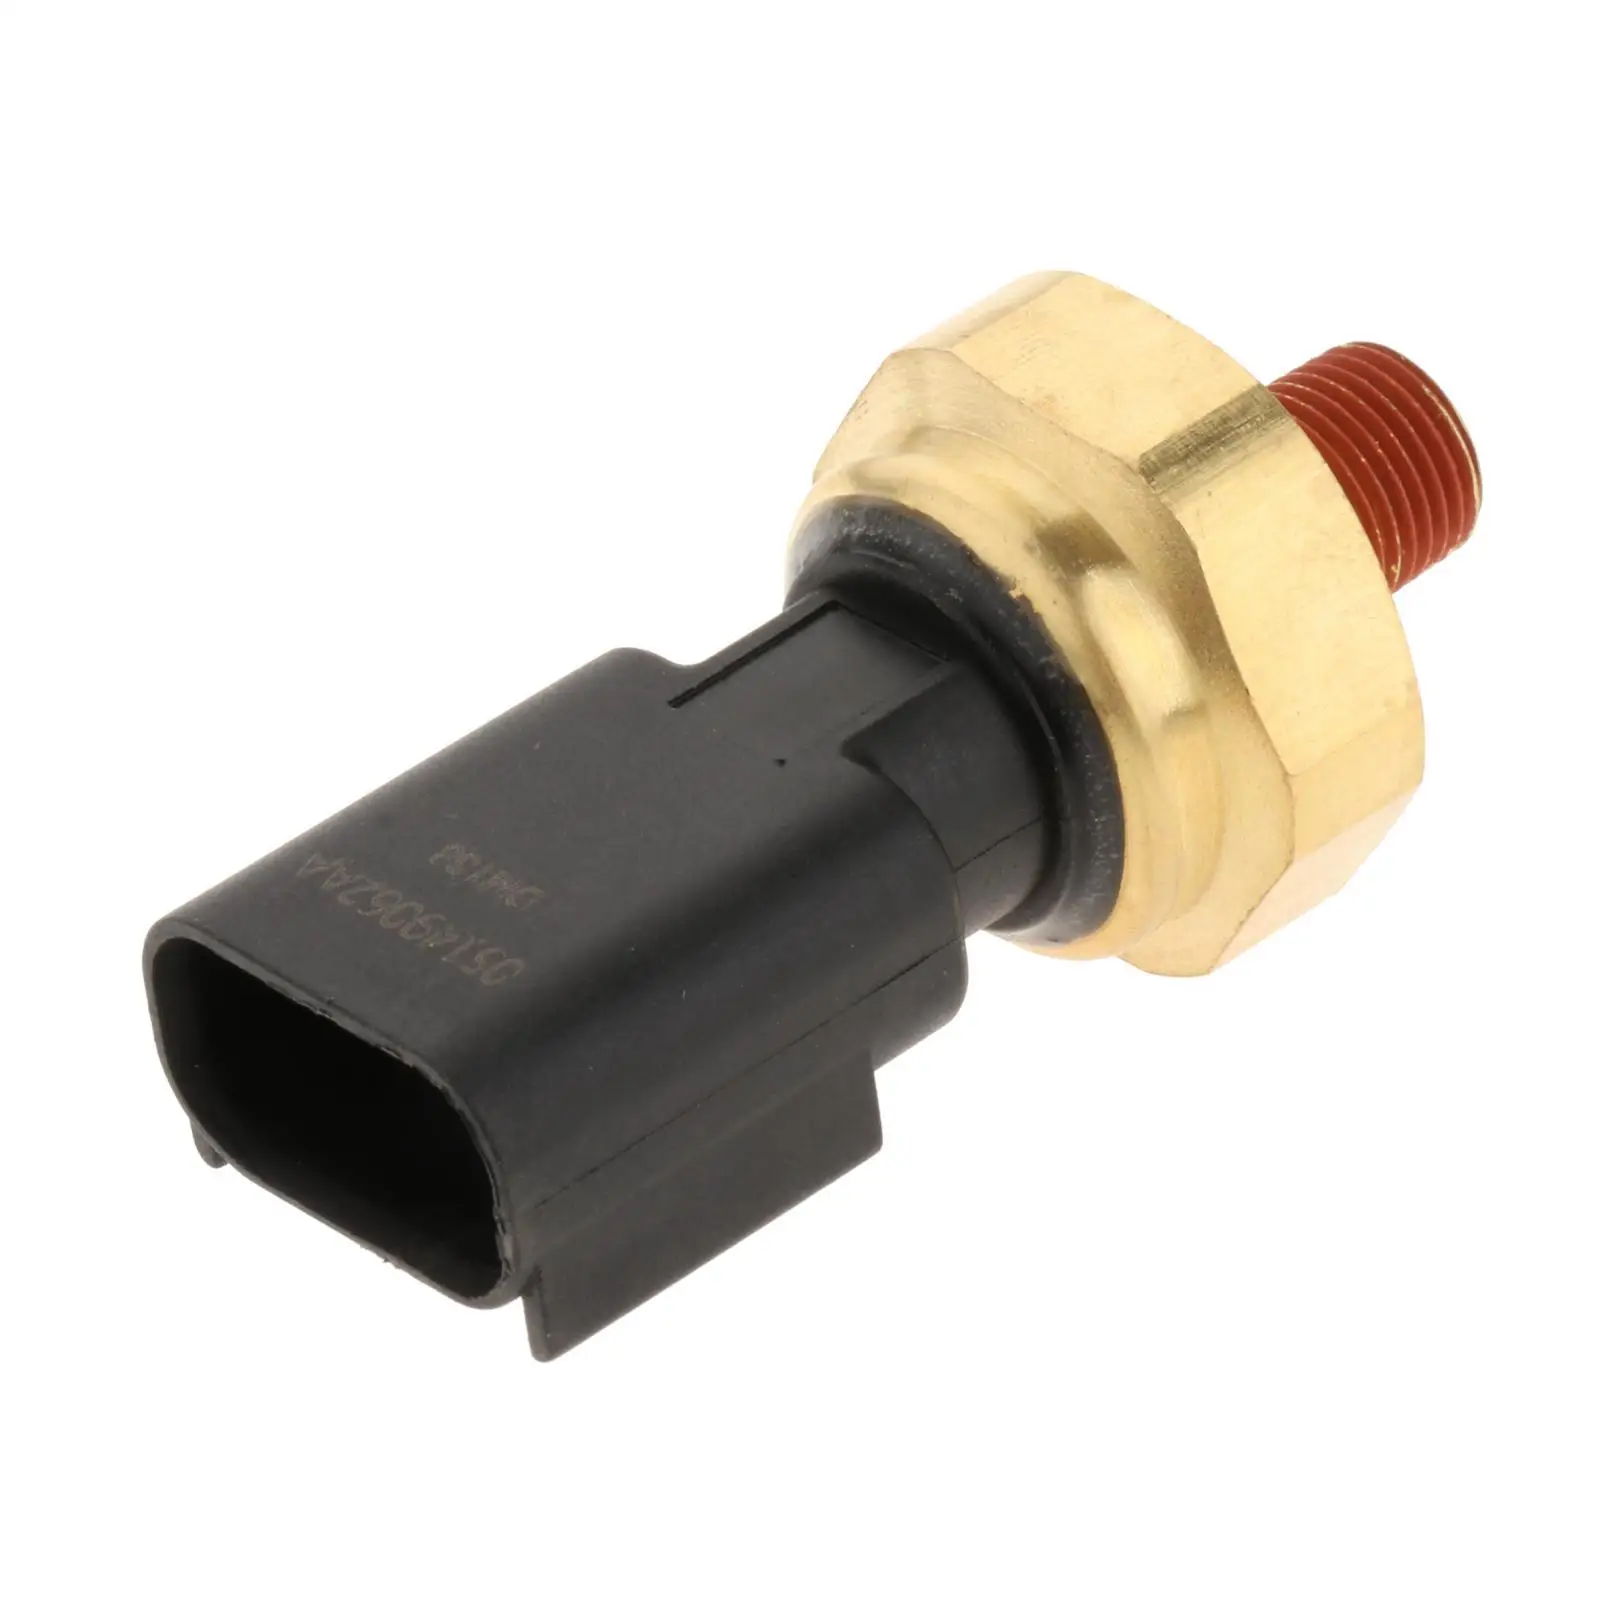 Oil Pressure Sensor Switch PS401 Engine 5149062AA 05149062AA Fit for for Jeep